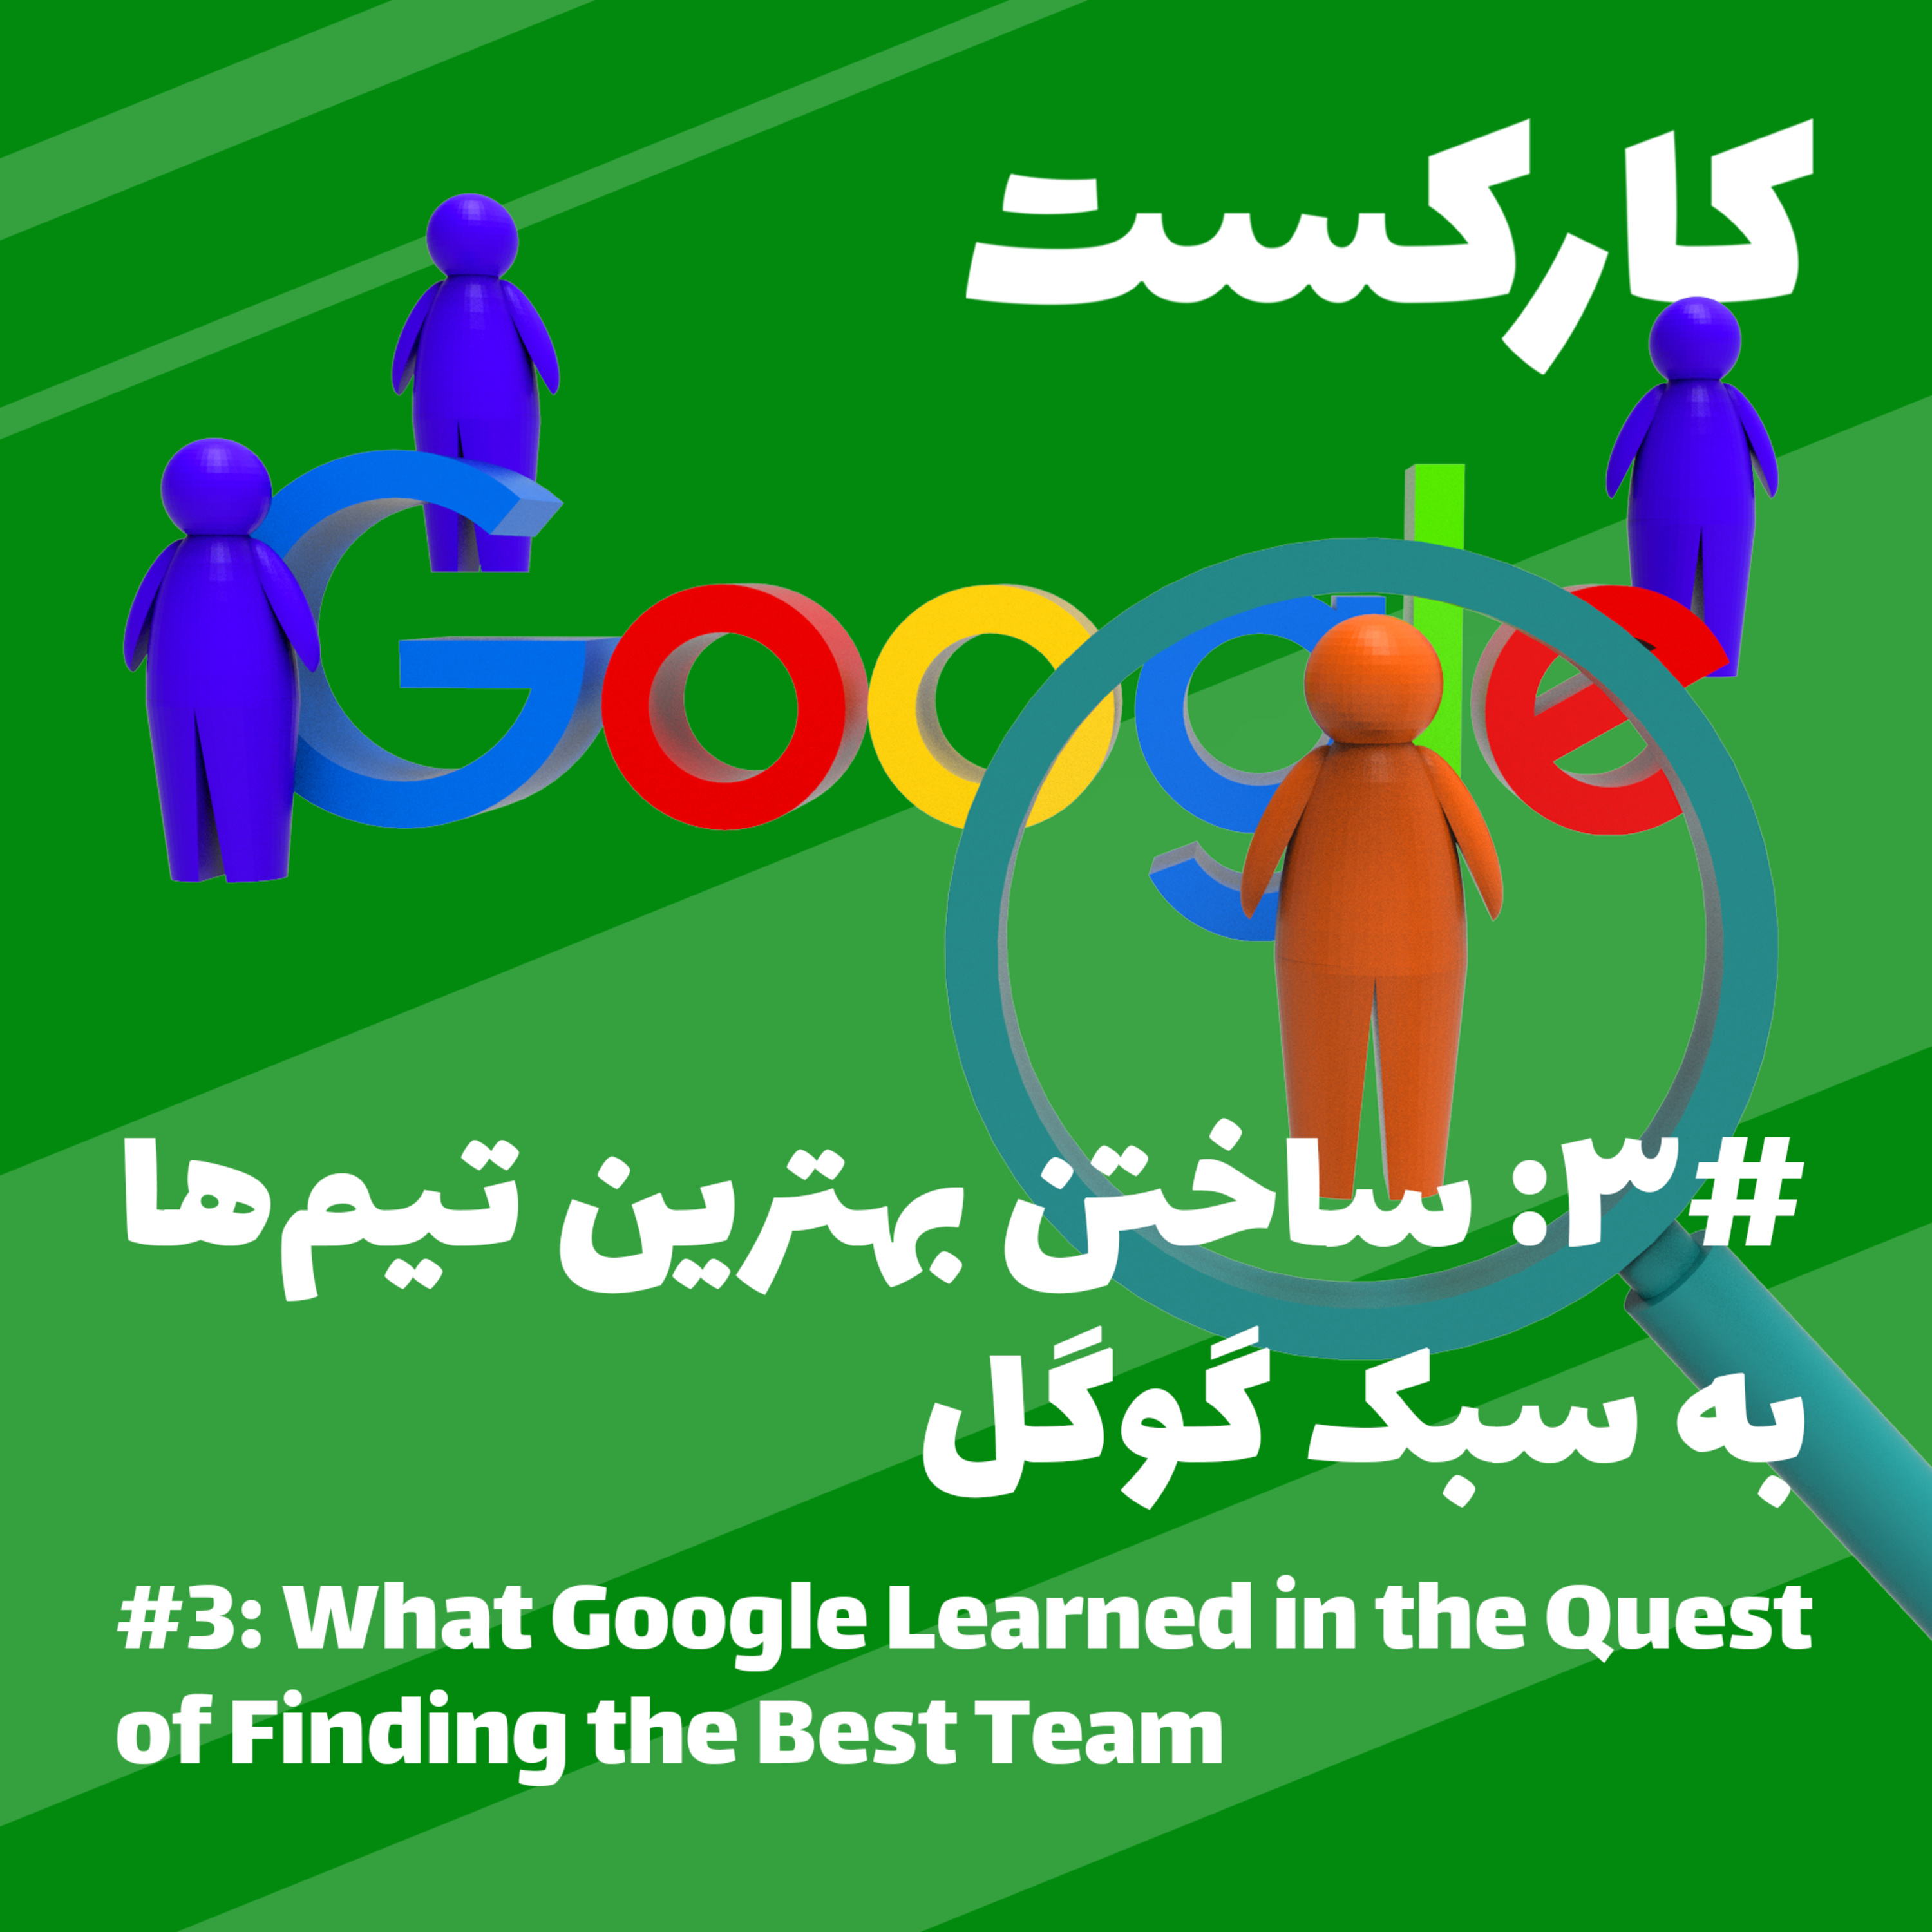 3: What Google Learned in the Quest of Finding the Best Team - ساخت بهترین تیم‌ها به سبک گوگل